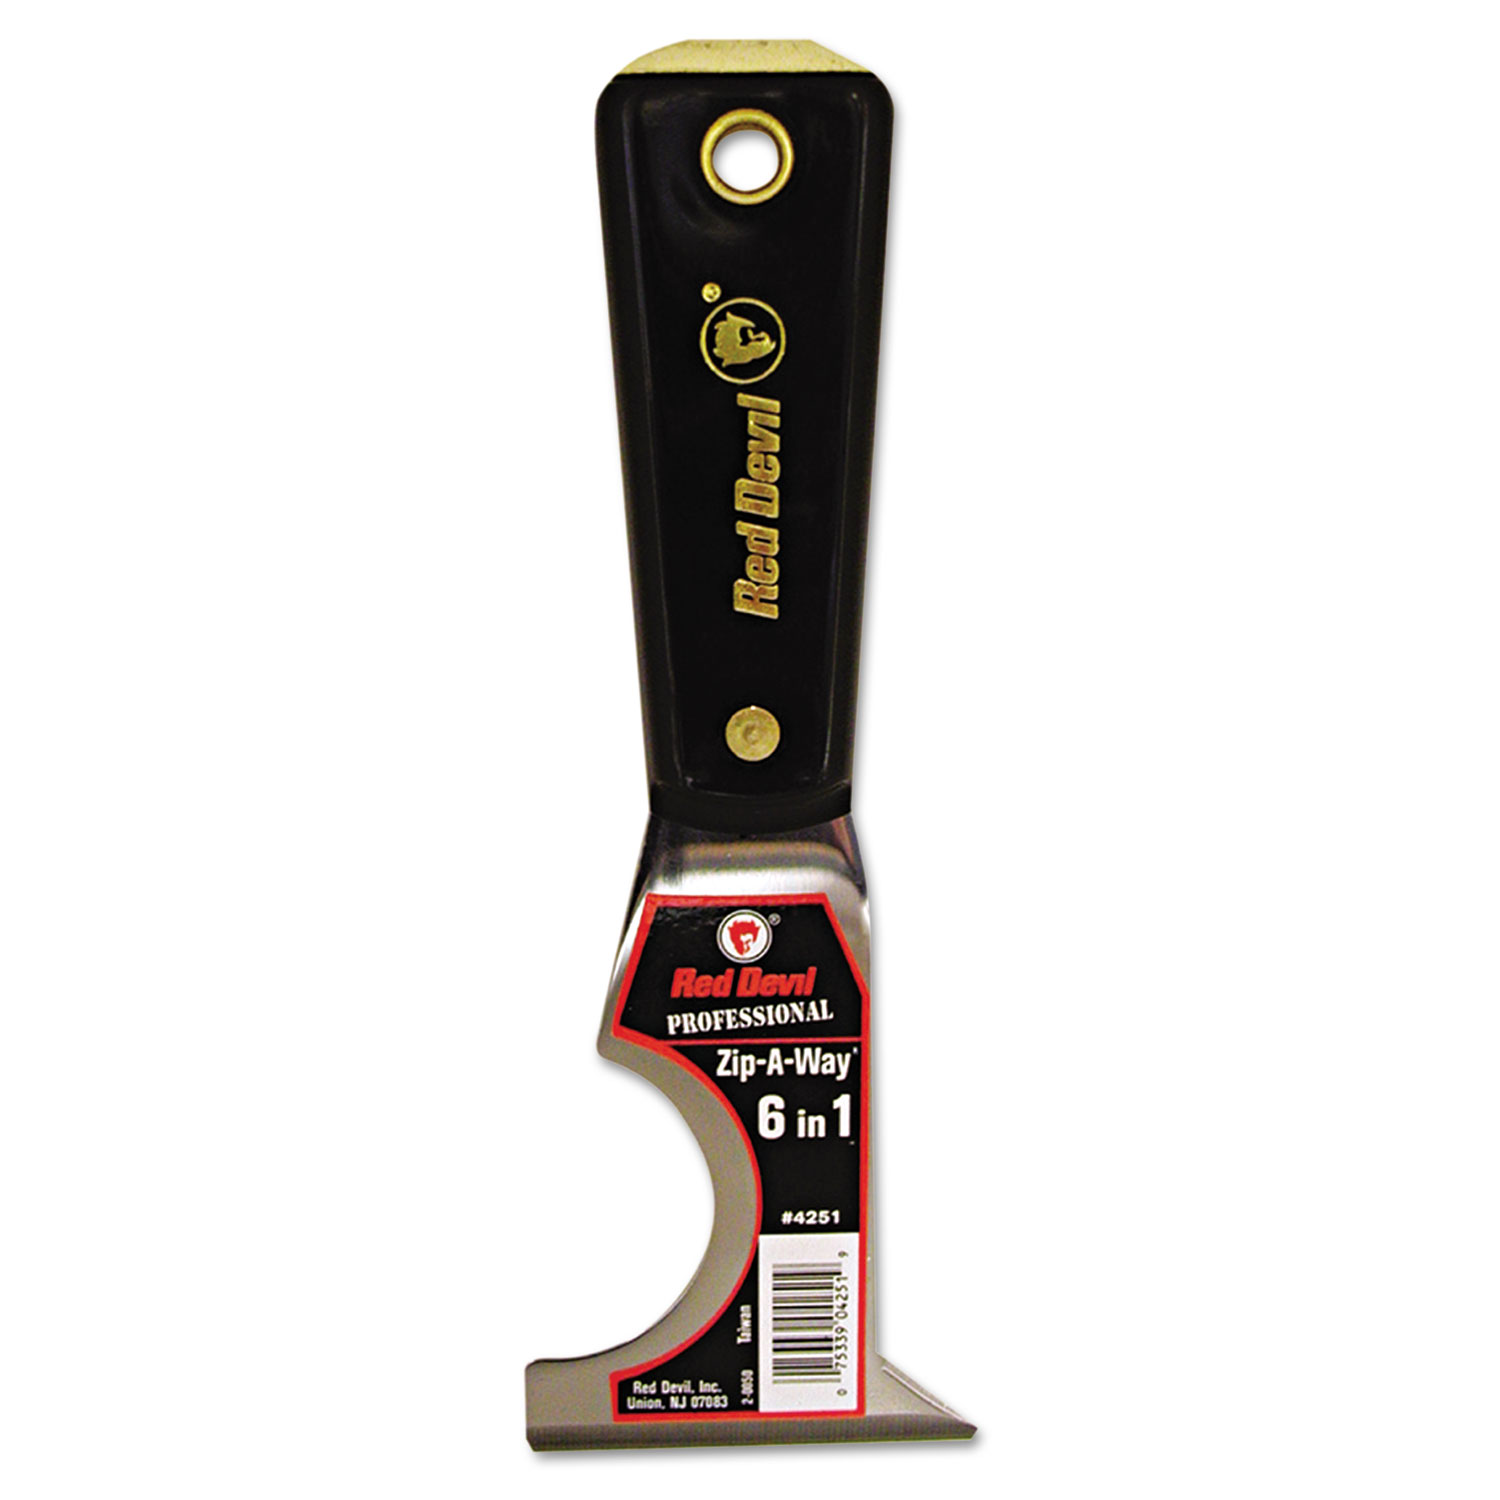  Red Devil 4251 Zip-A-Way 6 in-1 Painter's Tool, Nylon Handle (RDL4251) 